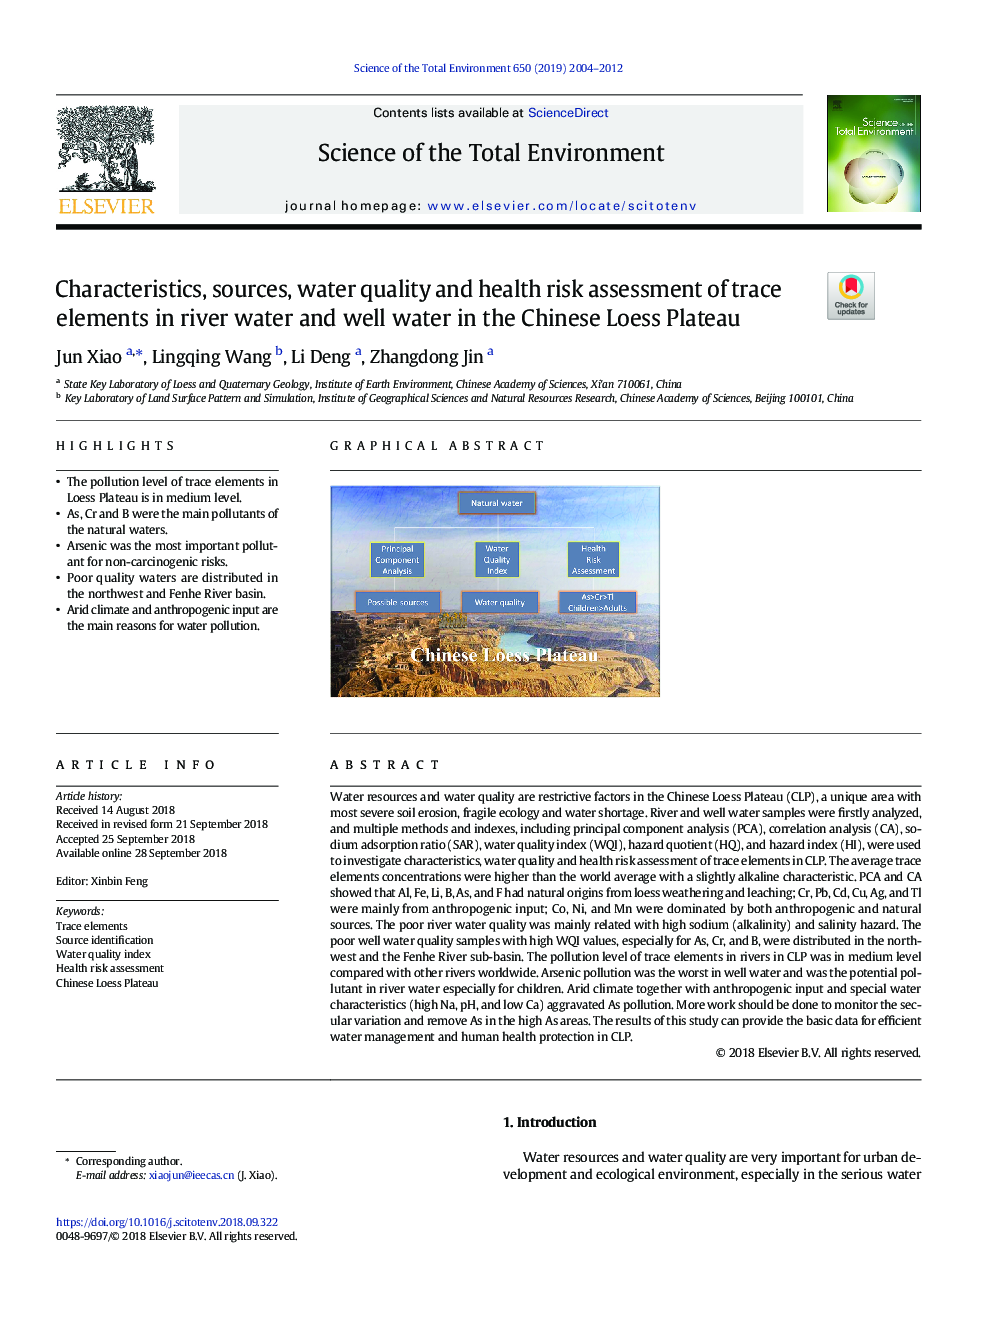 Characteristics, sources, water quality and health risk assessment of trace elements in river water and well water in the Chinese Loess Plateau